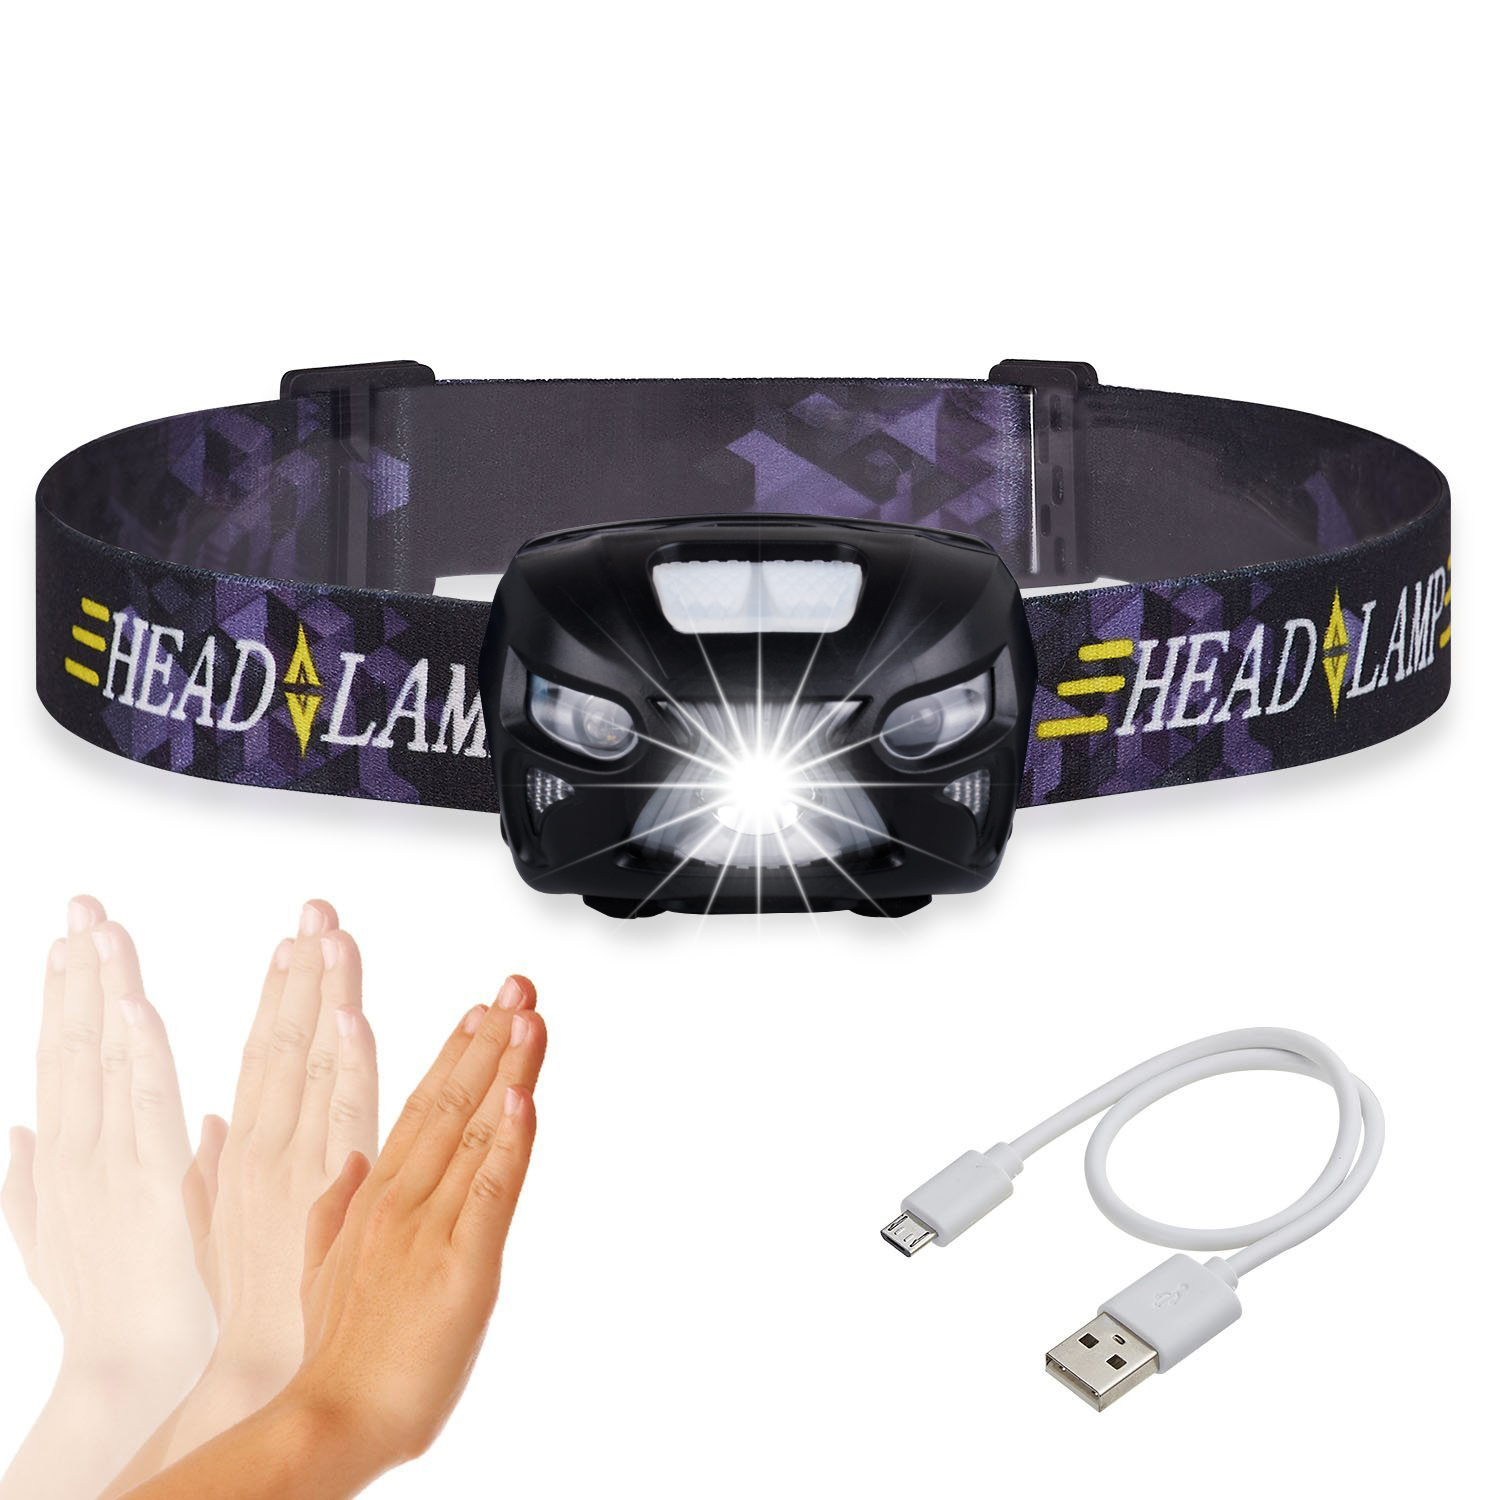 USB Rechargeable Headlamp Flashlight Sensor LED Headlamp Waterproof  Headlamps for Running, Walking, Camping, Reading, Hiking, Kids, DIY More,  USB Cable Included, Black